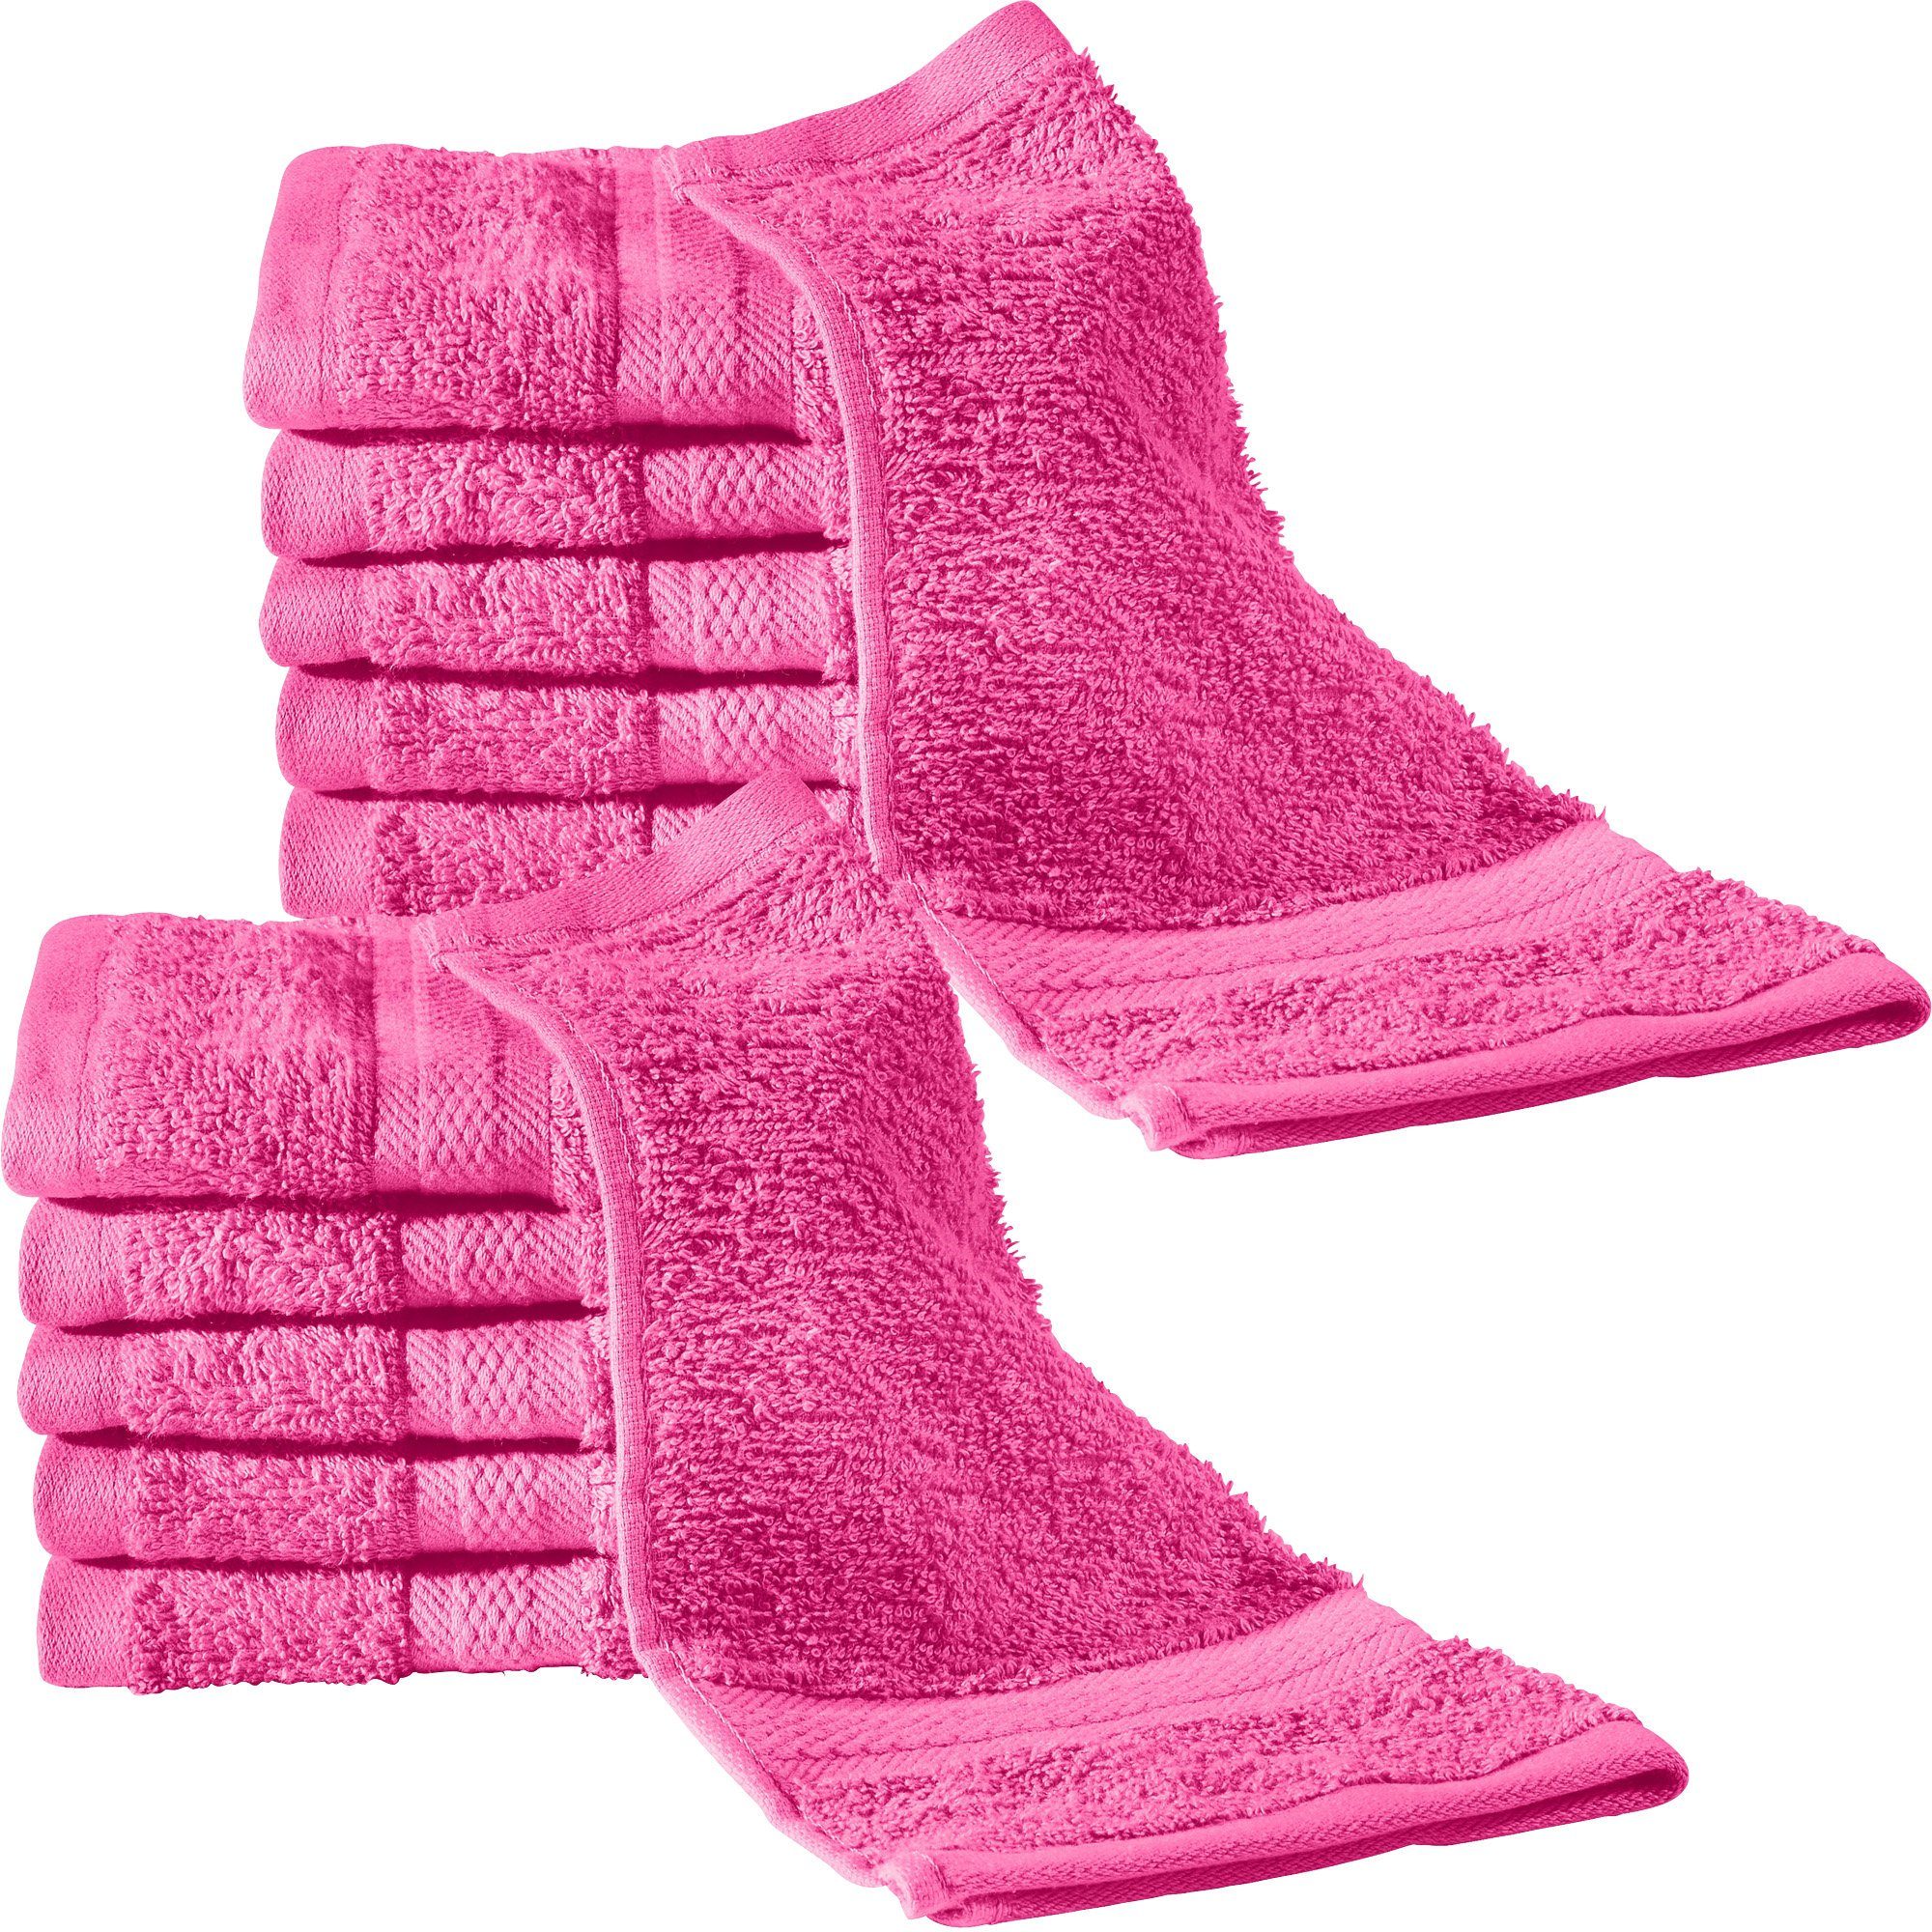 Walk-Frottier pink (12-tlg), 12er-Pack Seiftuch REDBEST Uni Seiftuch "Chicago"